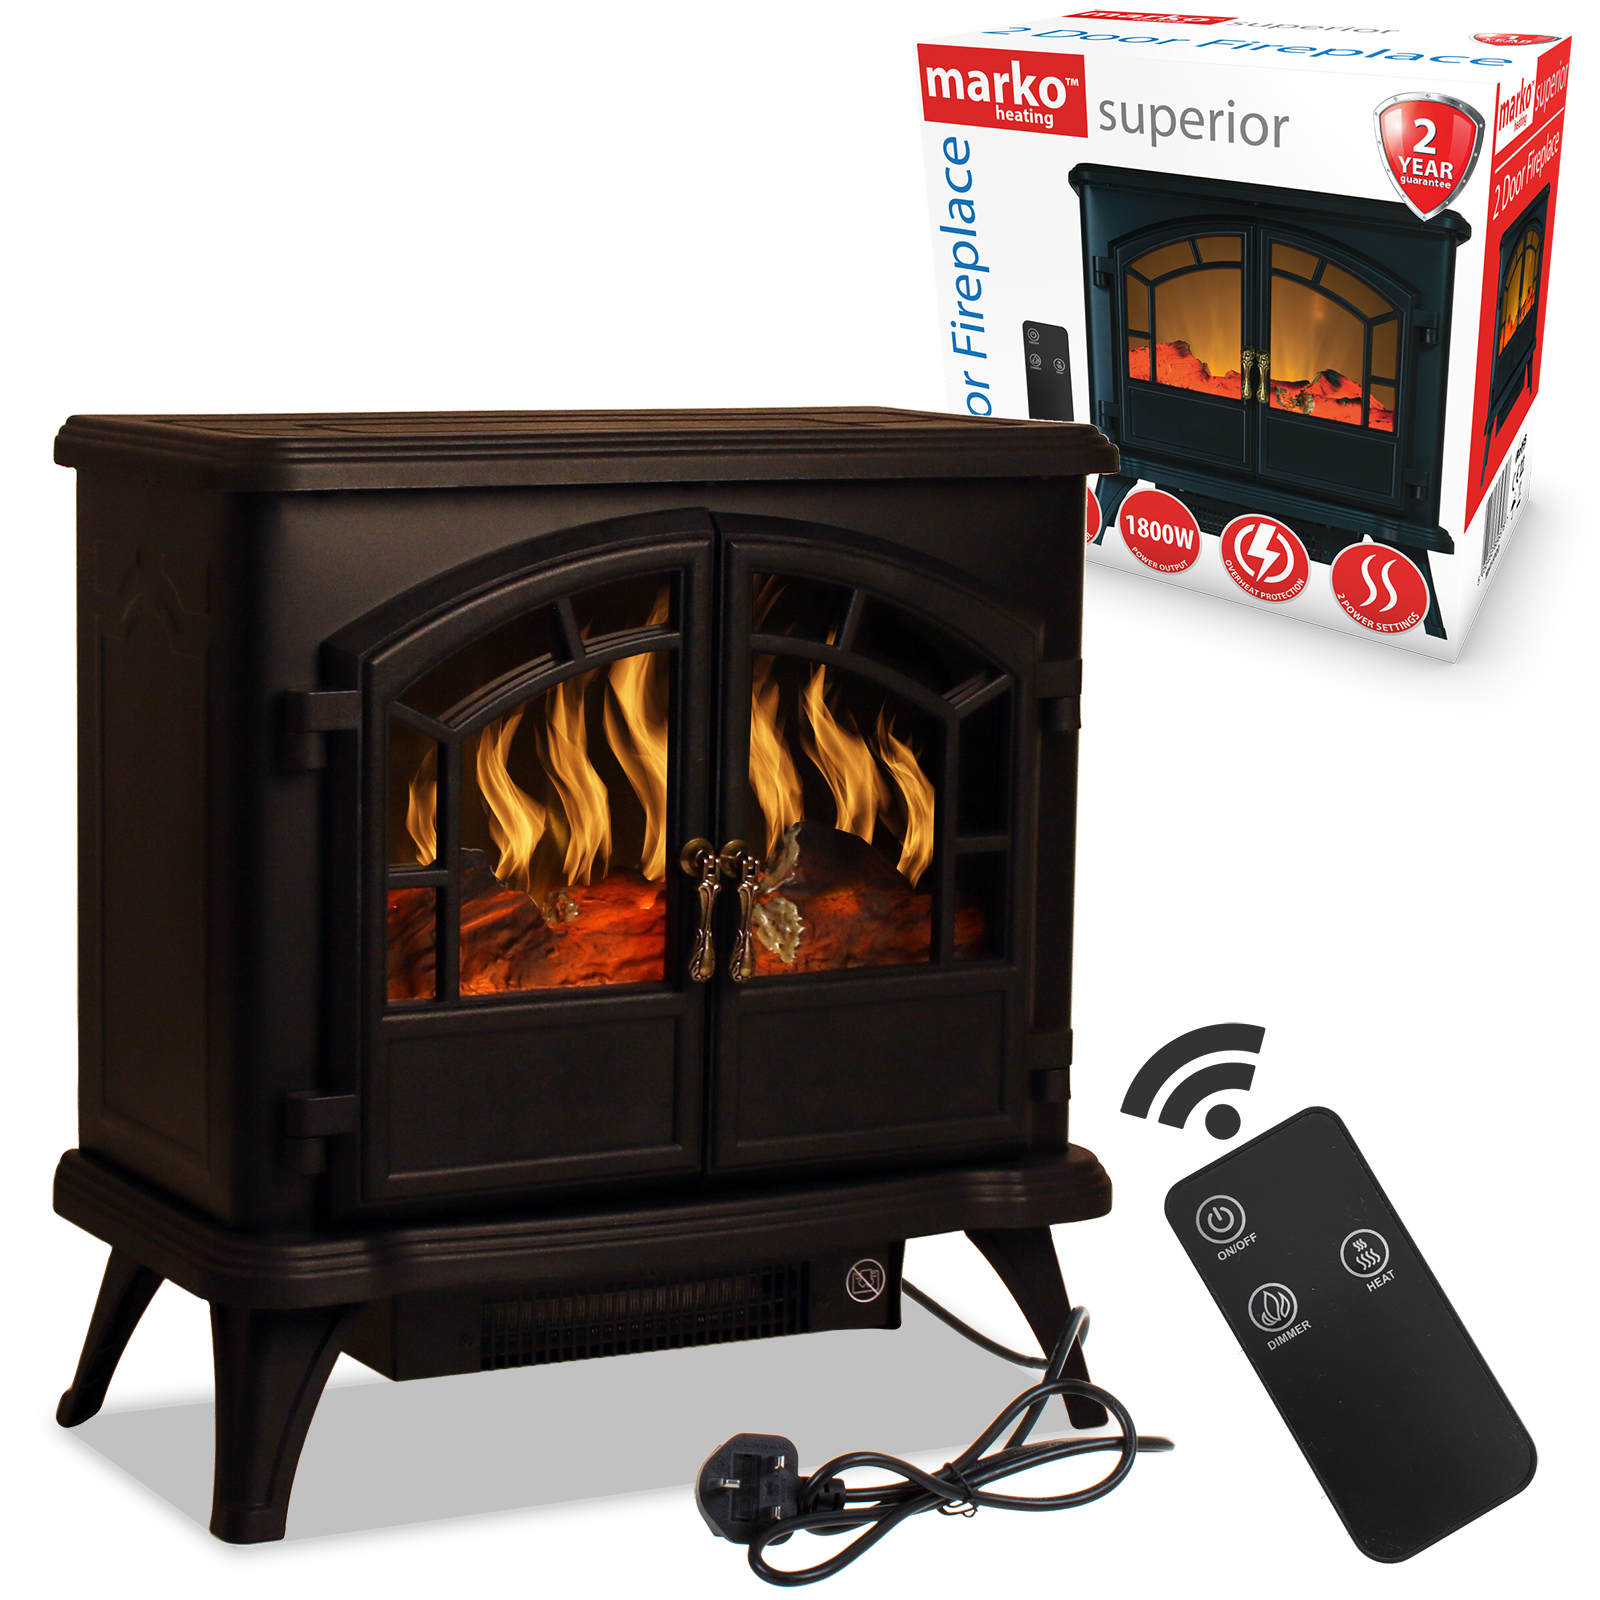 Details About Electric Fireplace 1800w Double Door Fan Heater Flame Effect Wood Burner Stove inside size 1600 X 1600